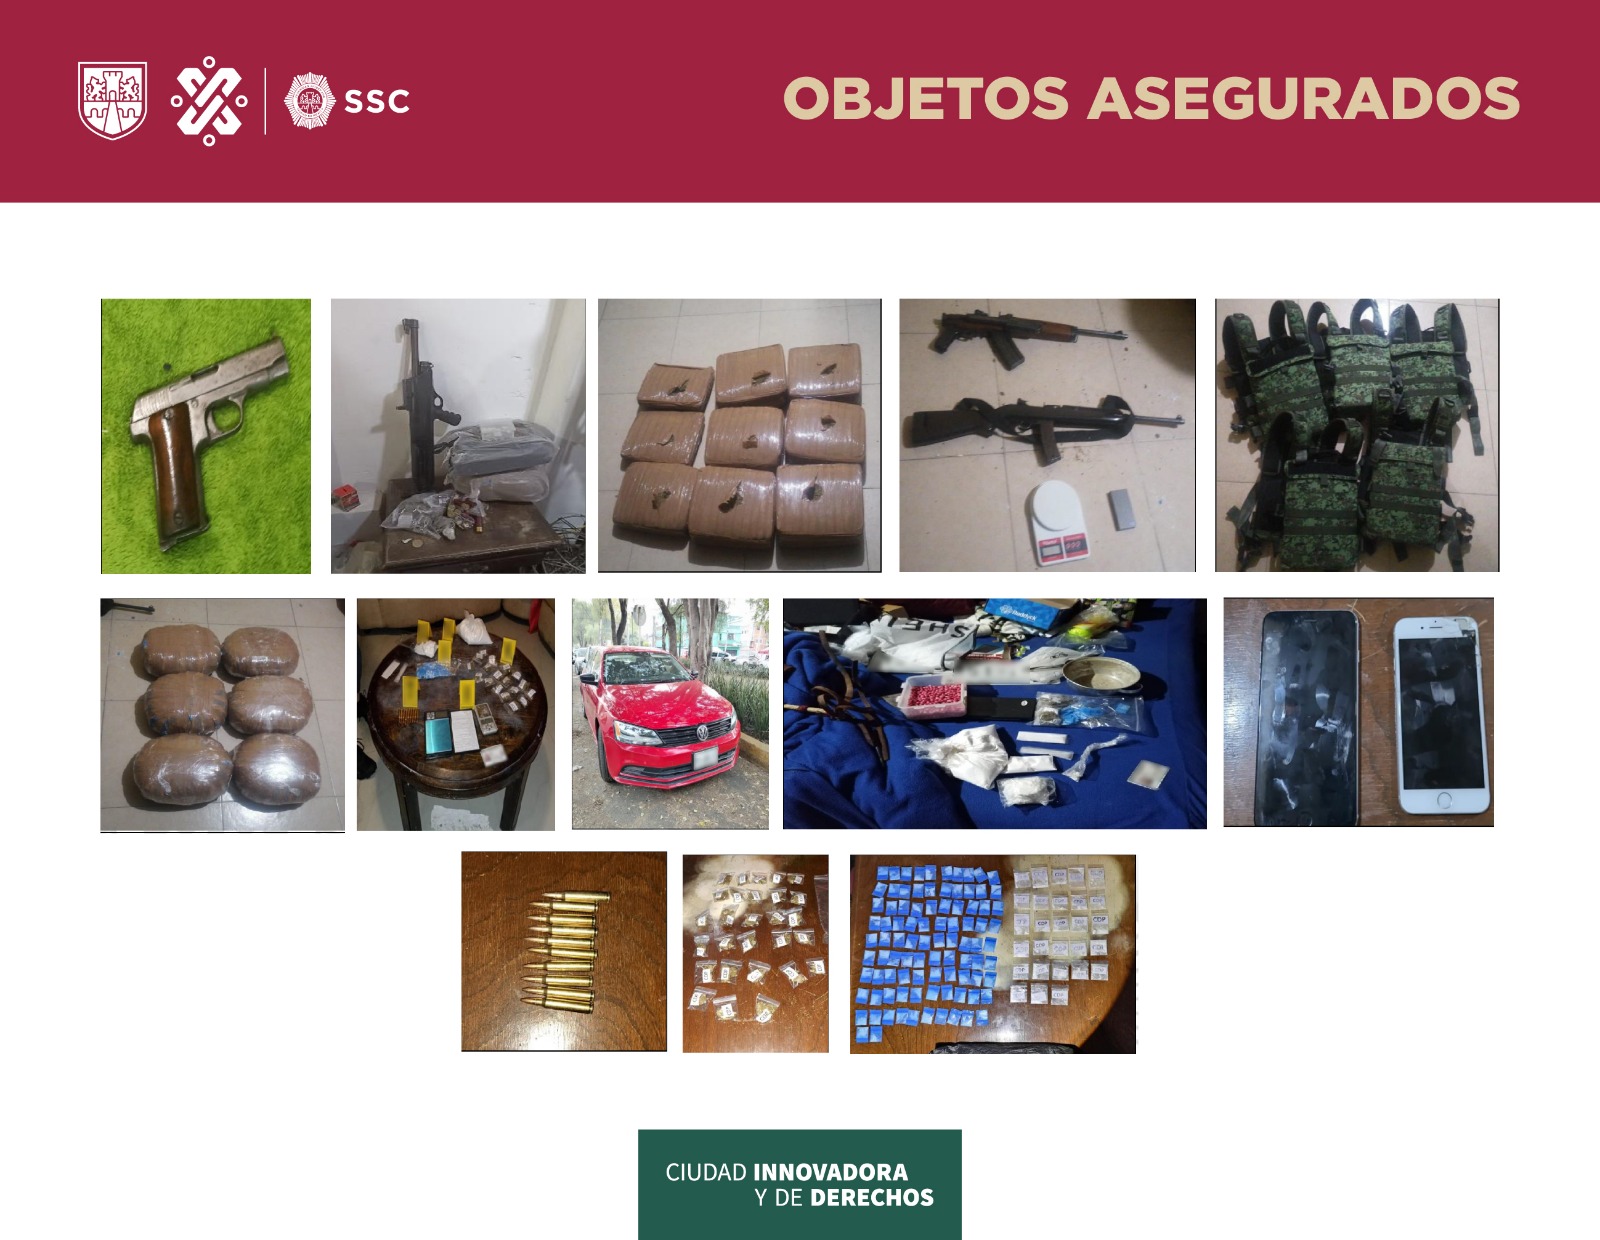 The authorities seized three long weapons, one short, useful cartridges, five ballistic vests, 15 packages and around 80 doses of marijuana, approximately 470 doses of apparent cocaine and other substances in powder and stone, a vehicle, telephone equipment and various documentation.  Photo: SSPCDMX